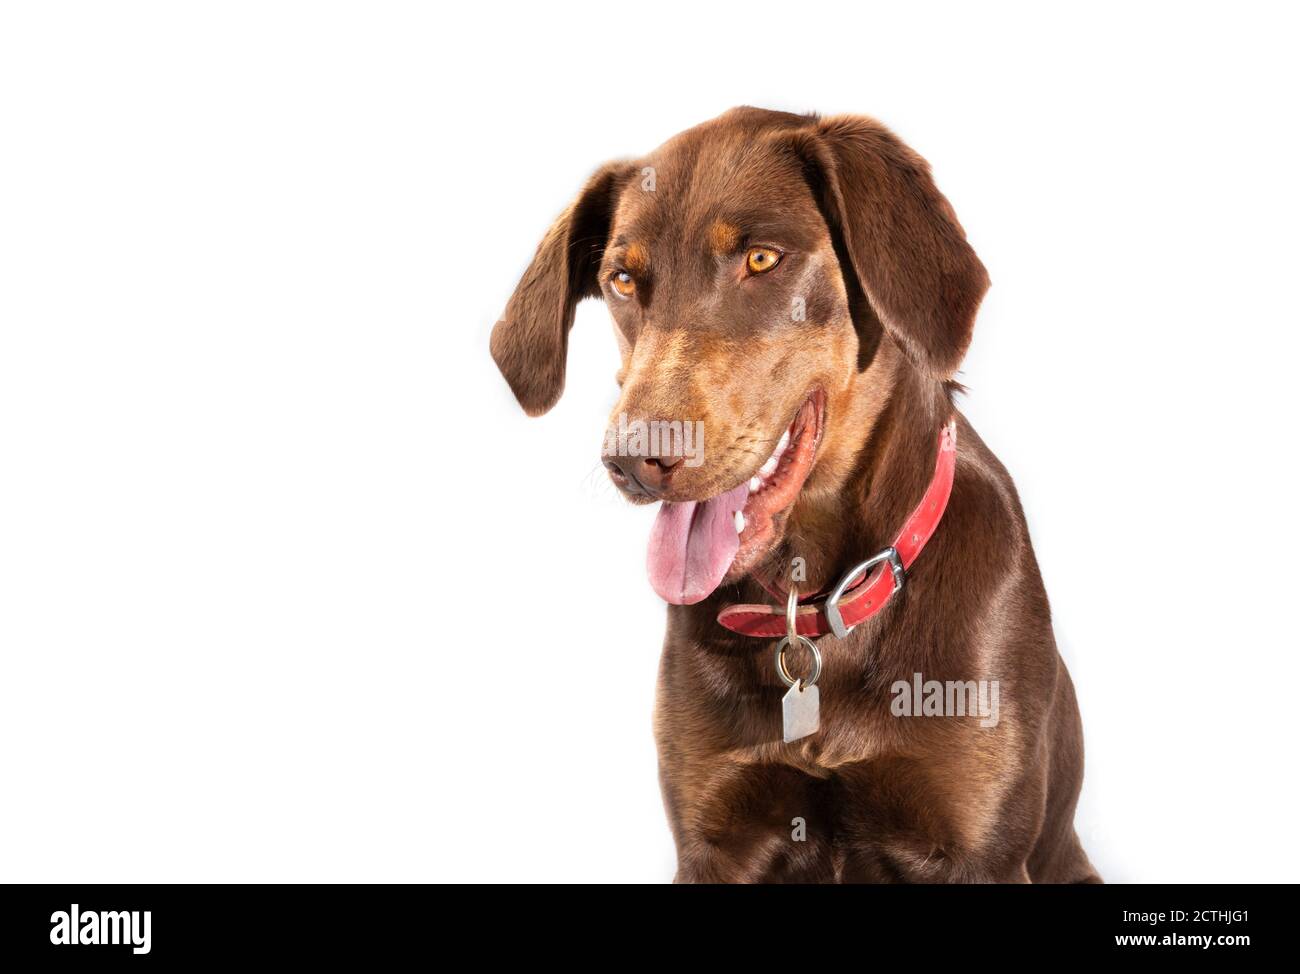 Head shot of Lab Pointer or Pointerdor. A mixed breed dog between a Labrador Retriever and Pointer. The brown adult female dog is looking down with mo Stock Photo